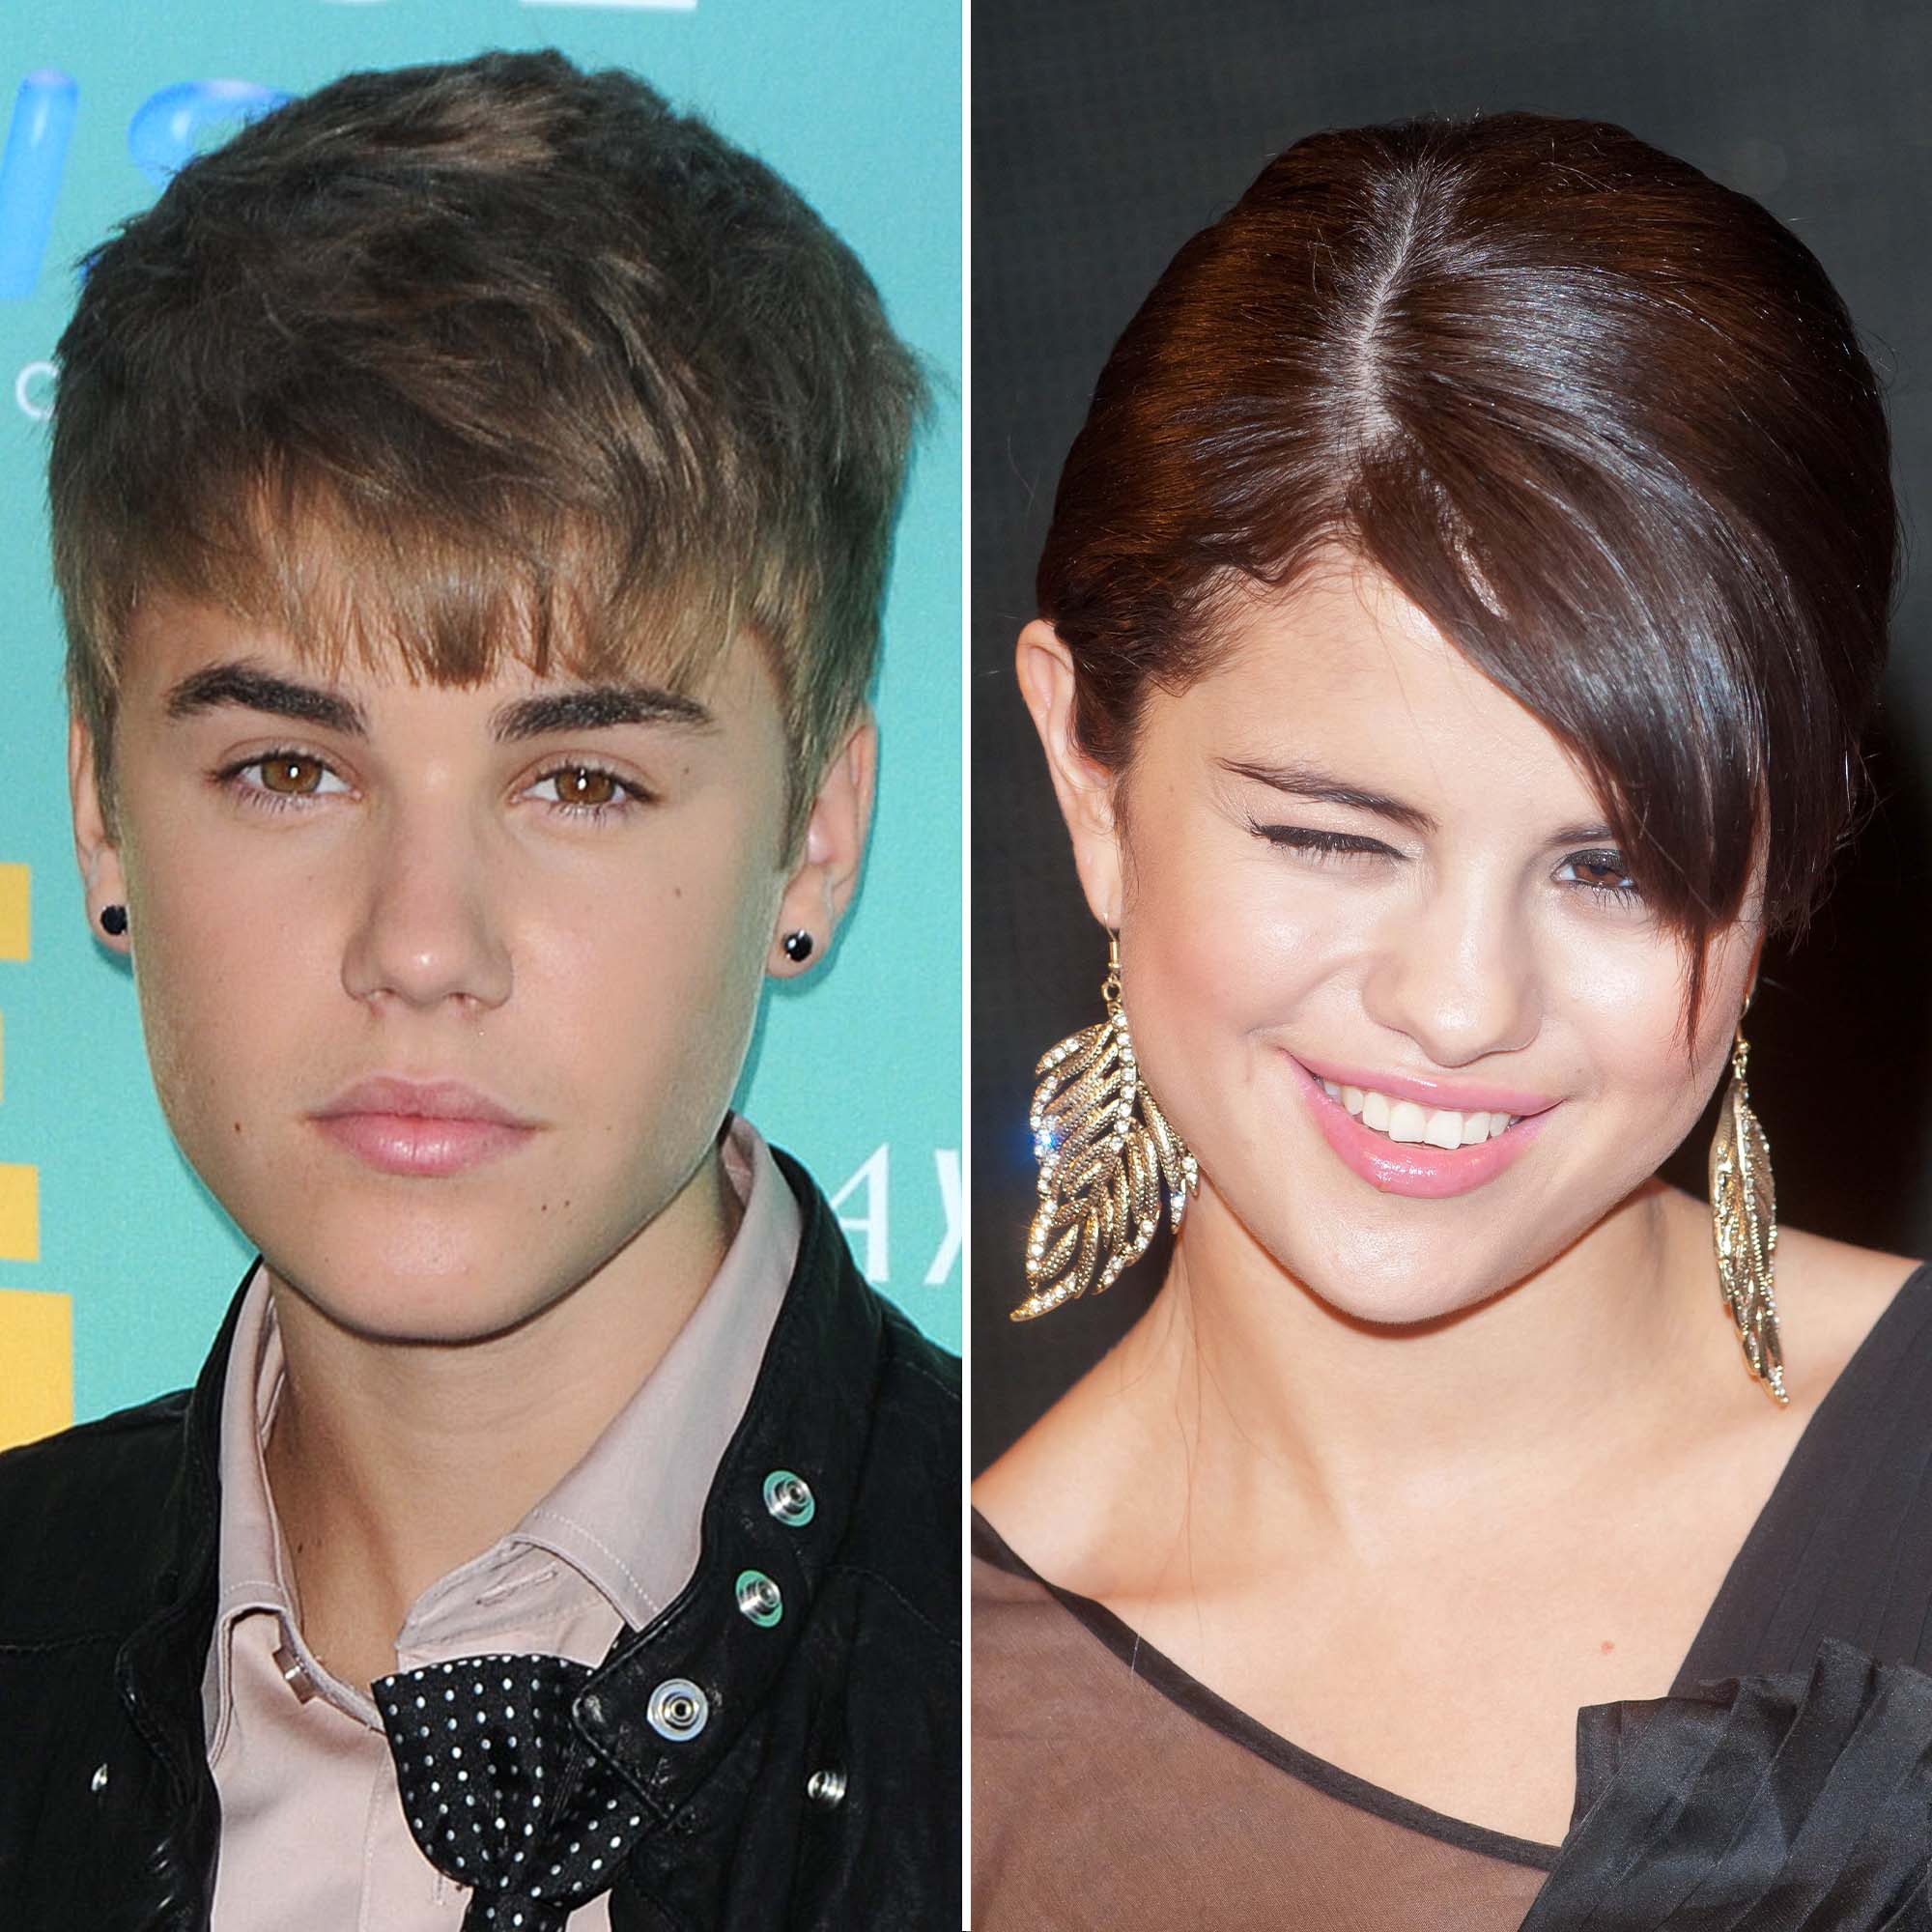 Justin Bieber and Selena Gomez A Timeline of Their Relationship